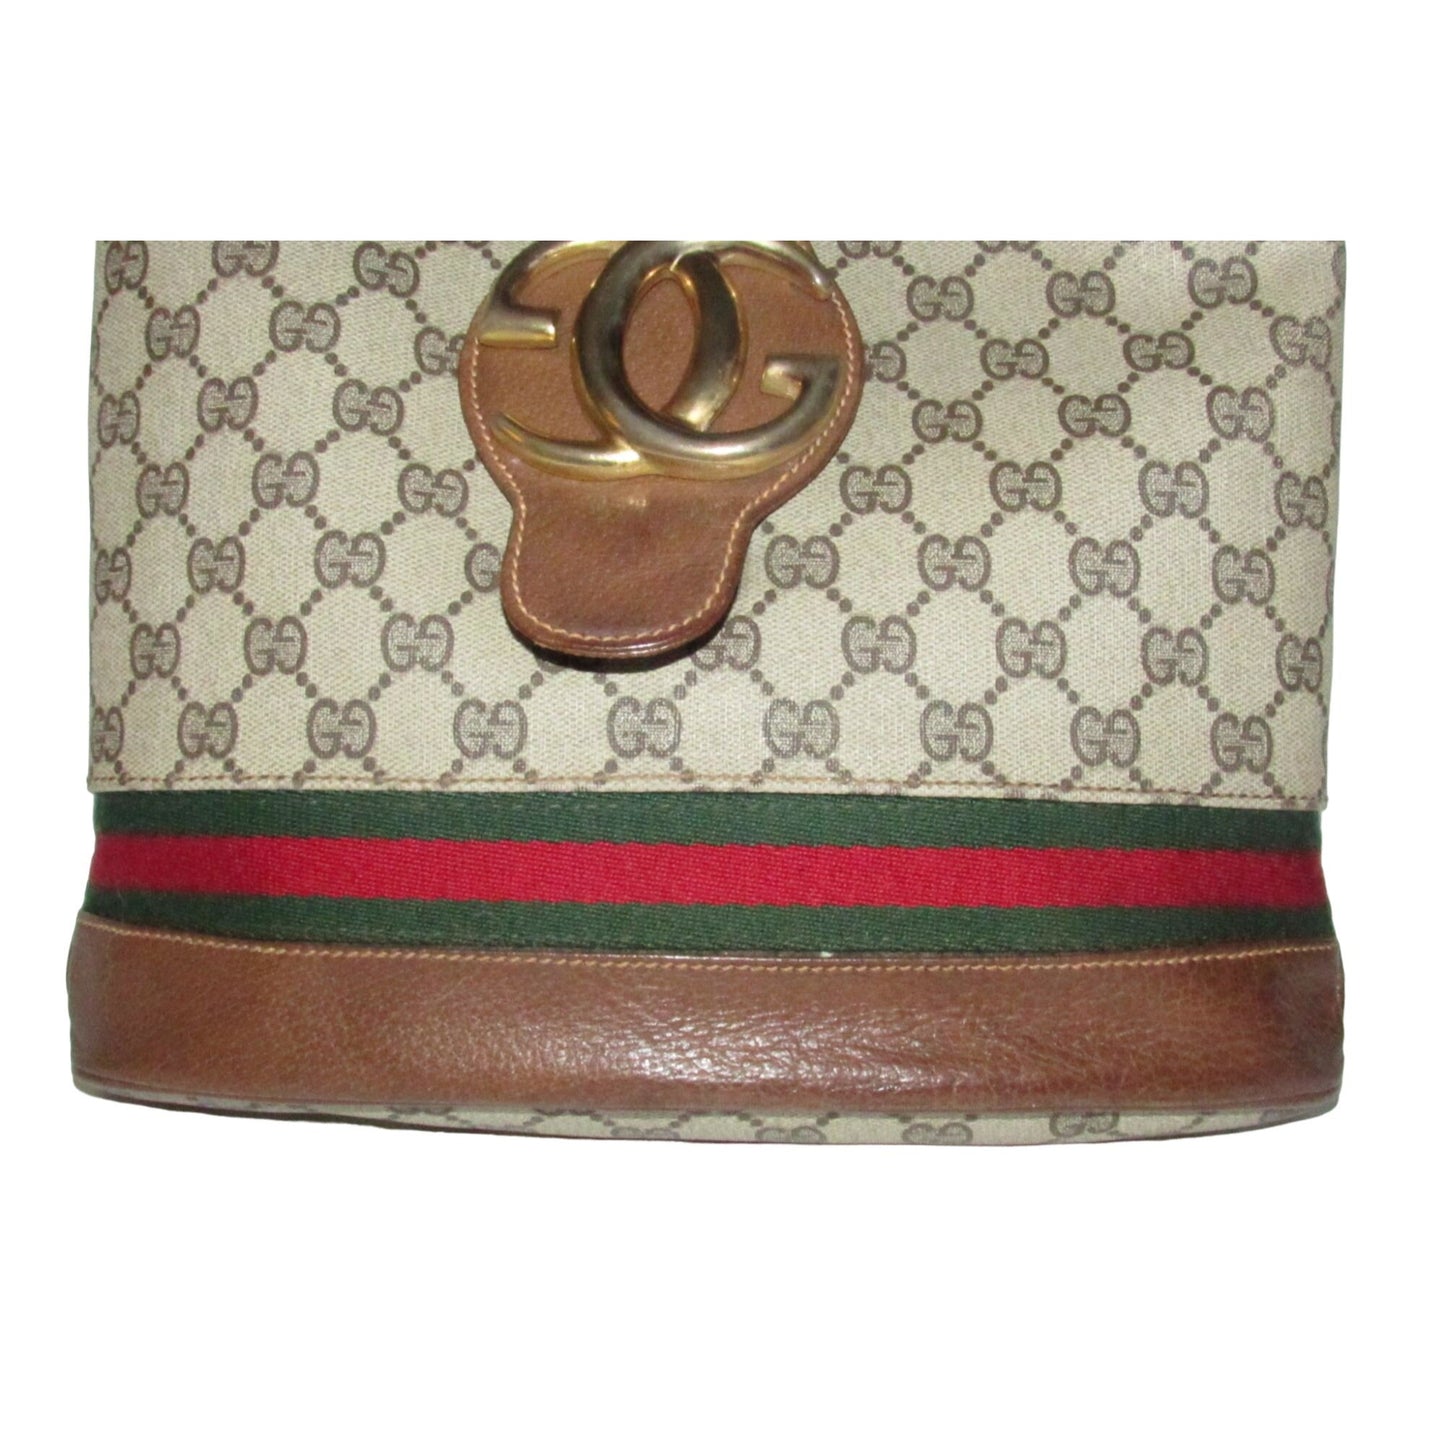 RARE, Gucci, brown Guccissima print canvas & leather, bucket bag with an XL bold gold 'GG' & red & green stripe